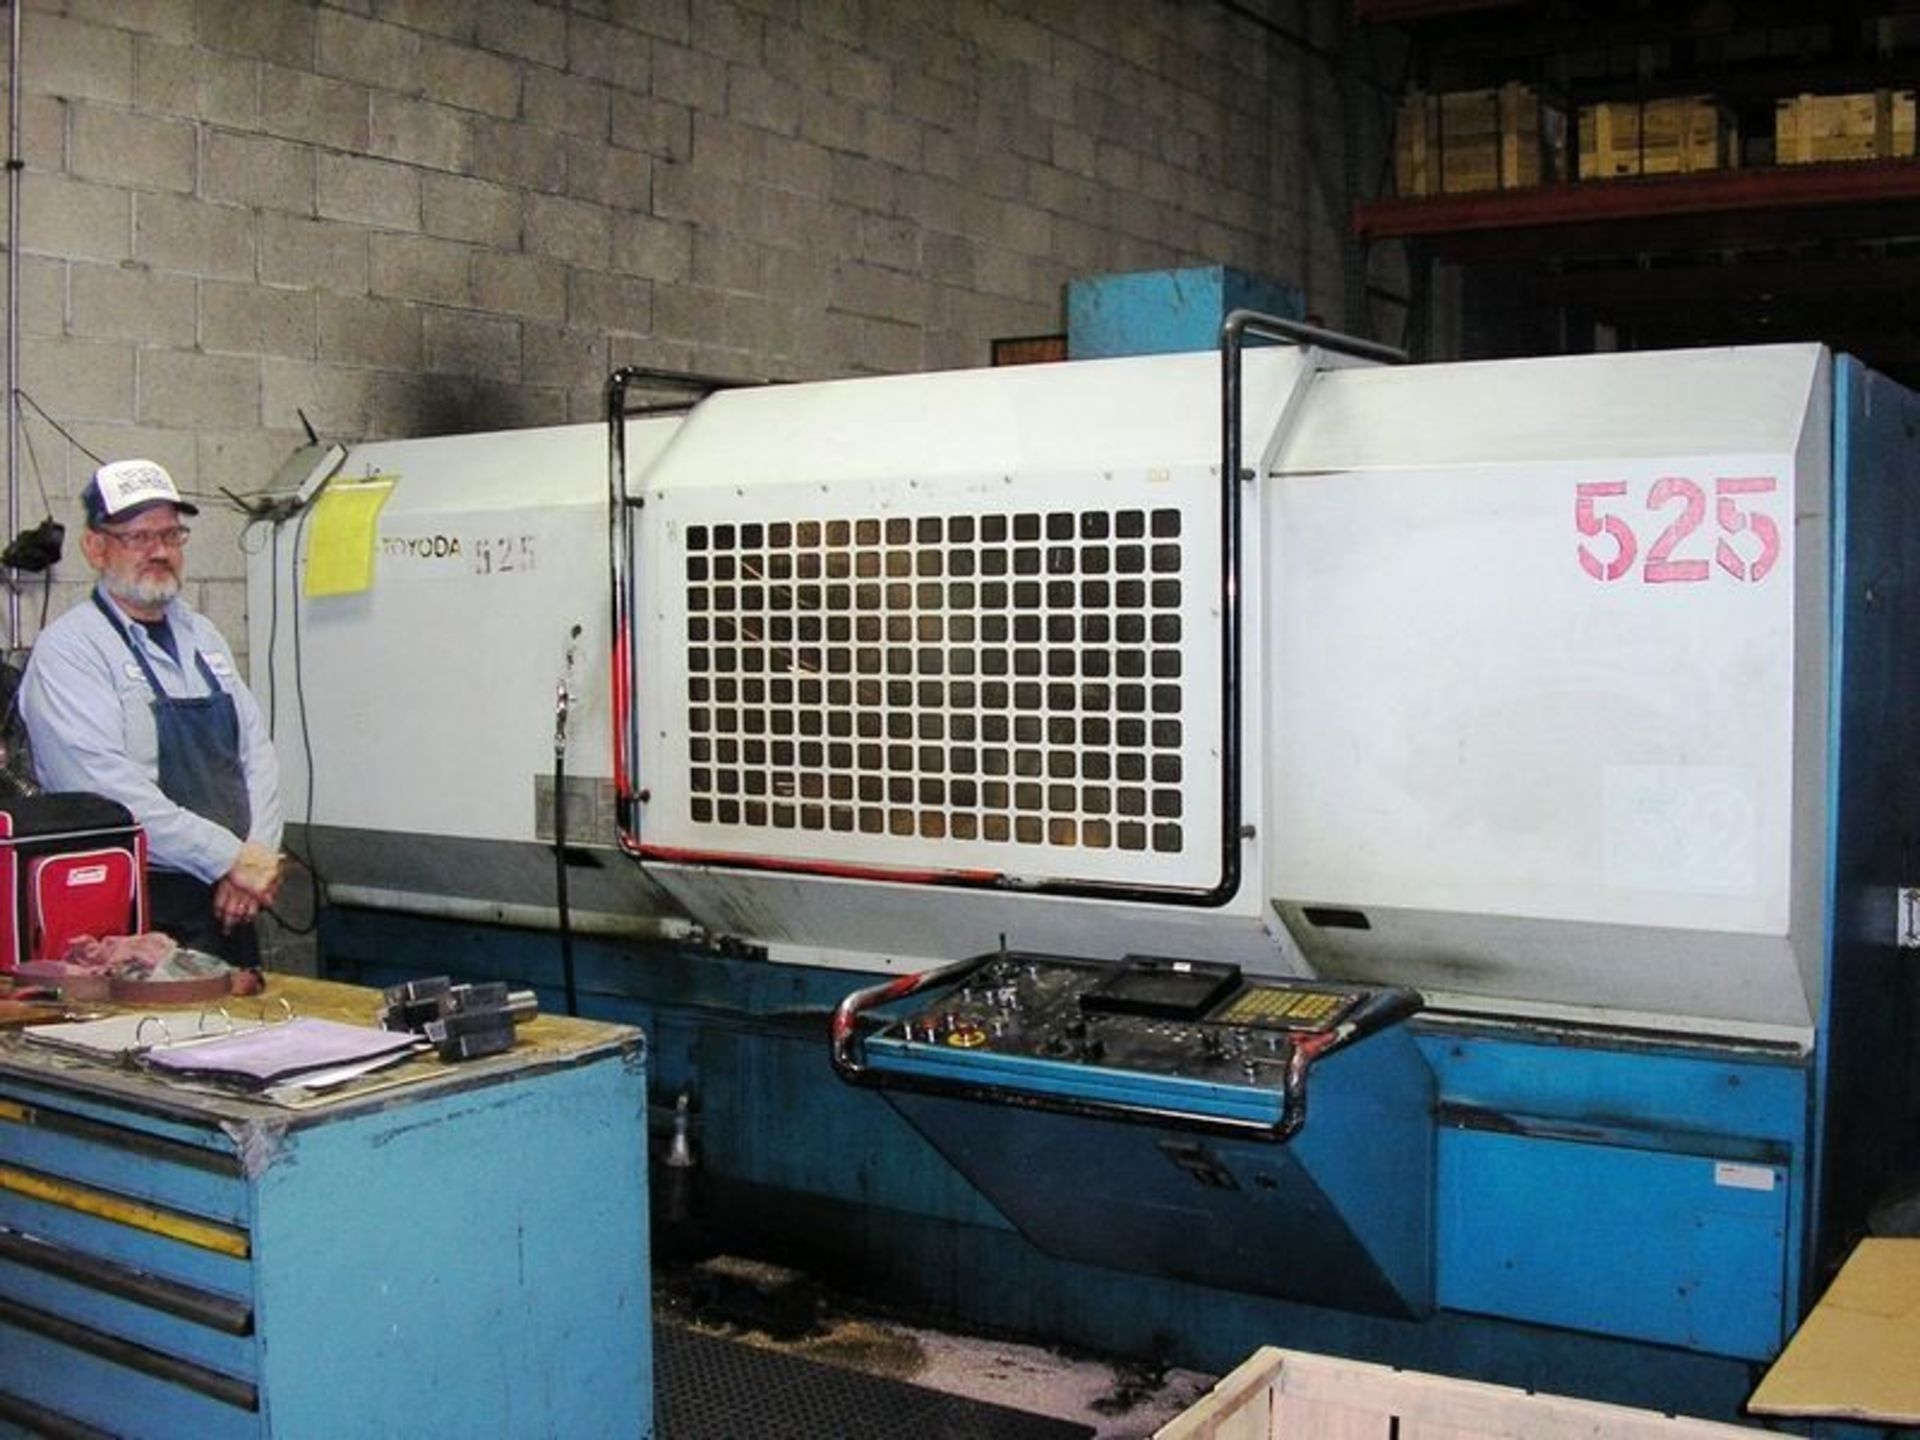 12"x40" HES Ernault Toyoda Model GT-52 CNC Lathe, S/N 52033, New 1986 General Specifications,